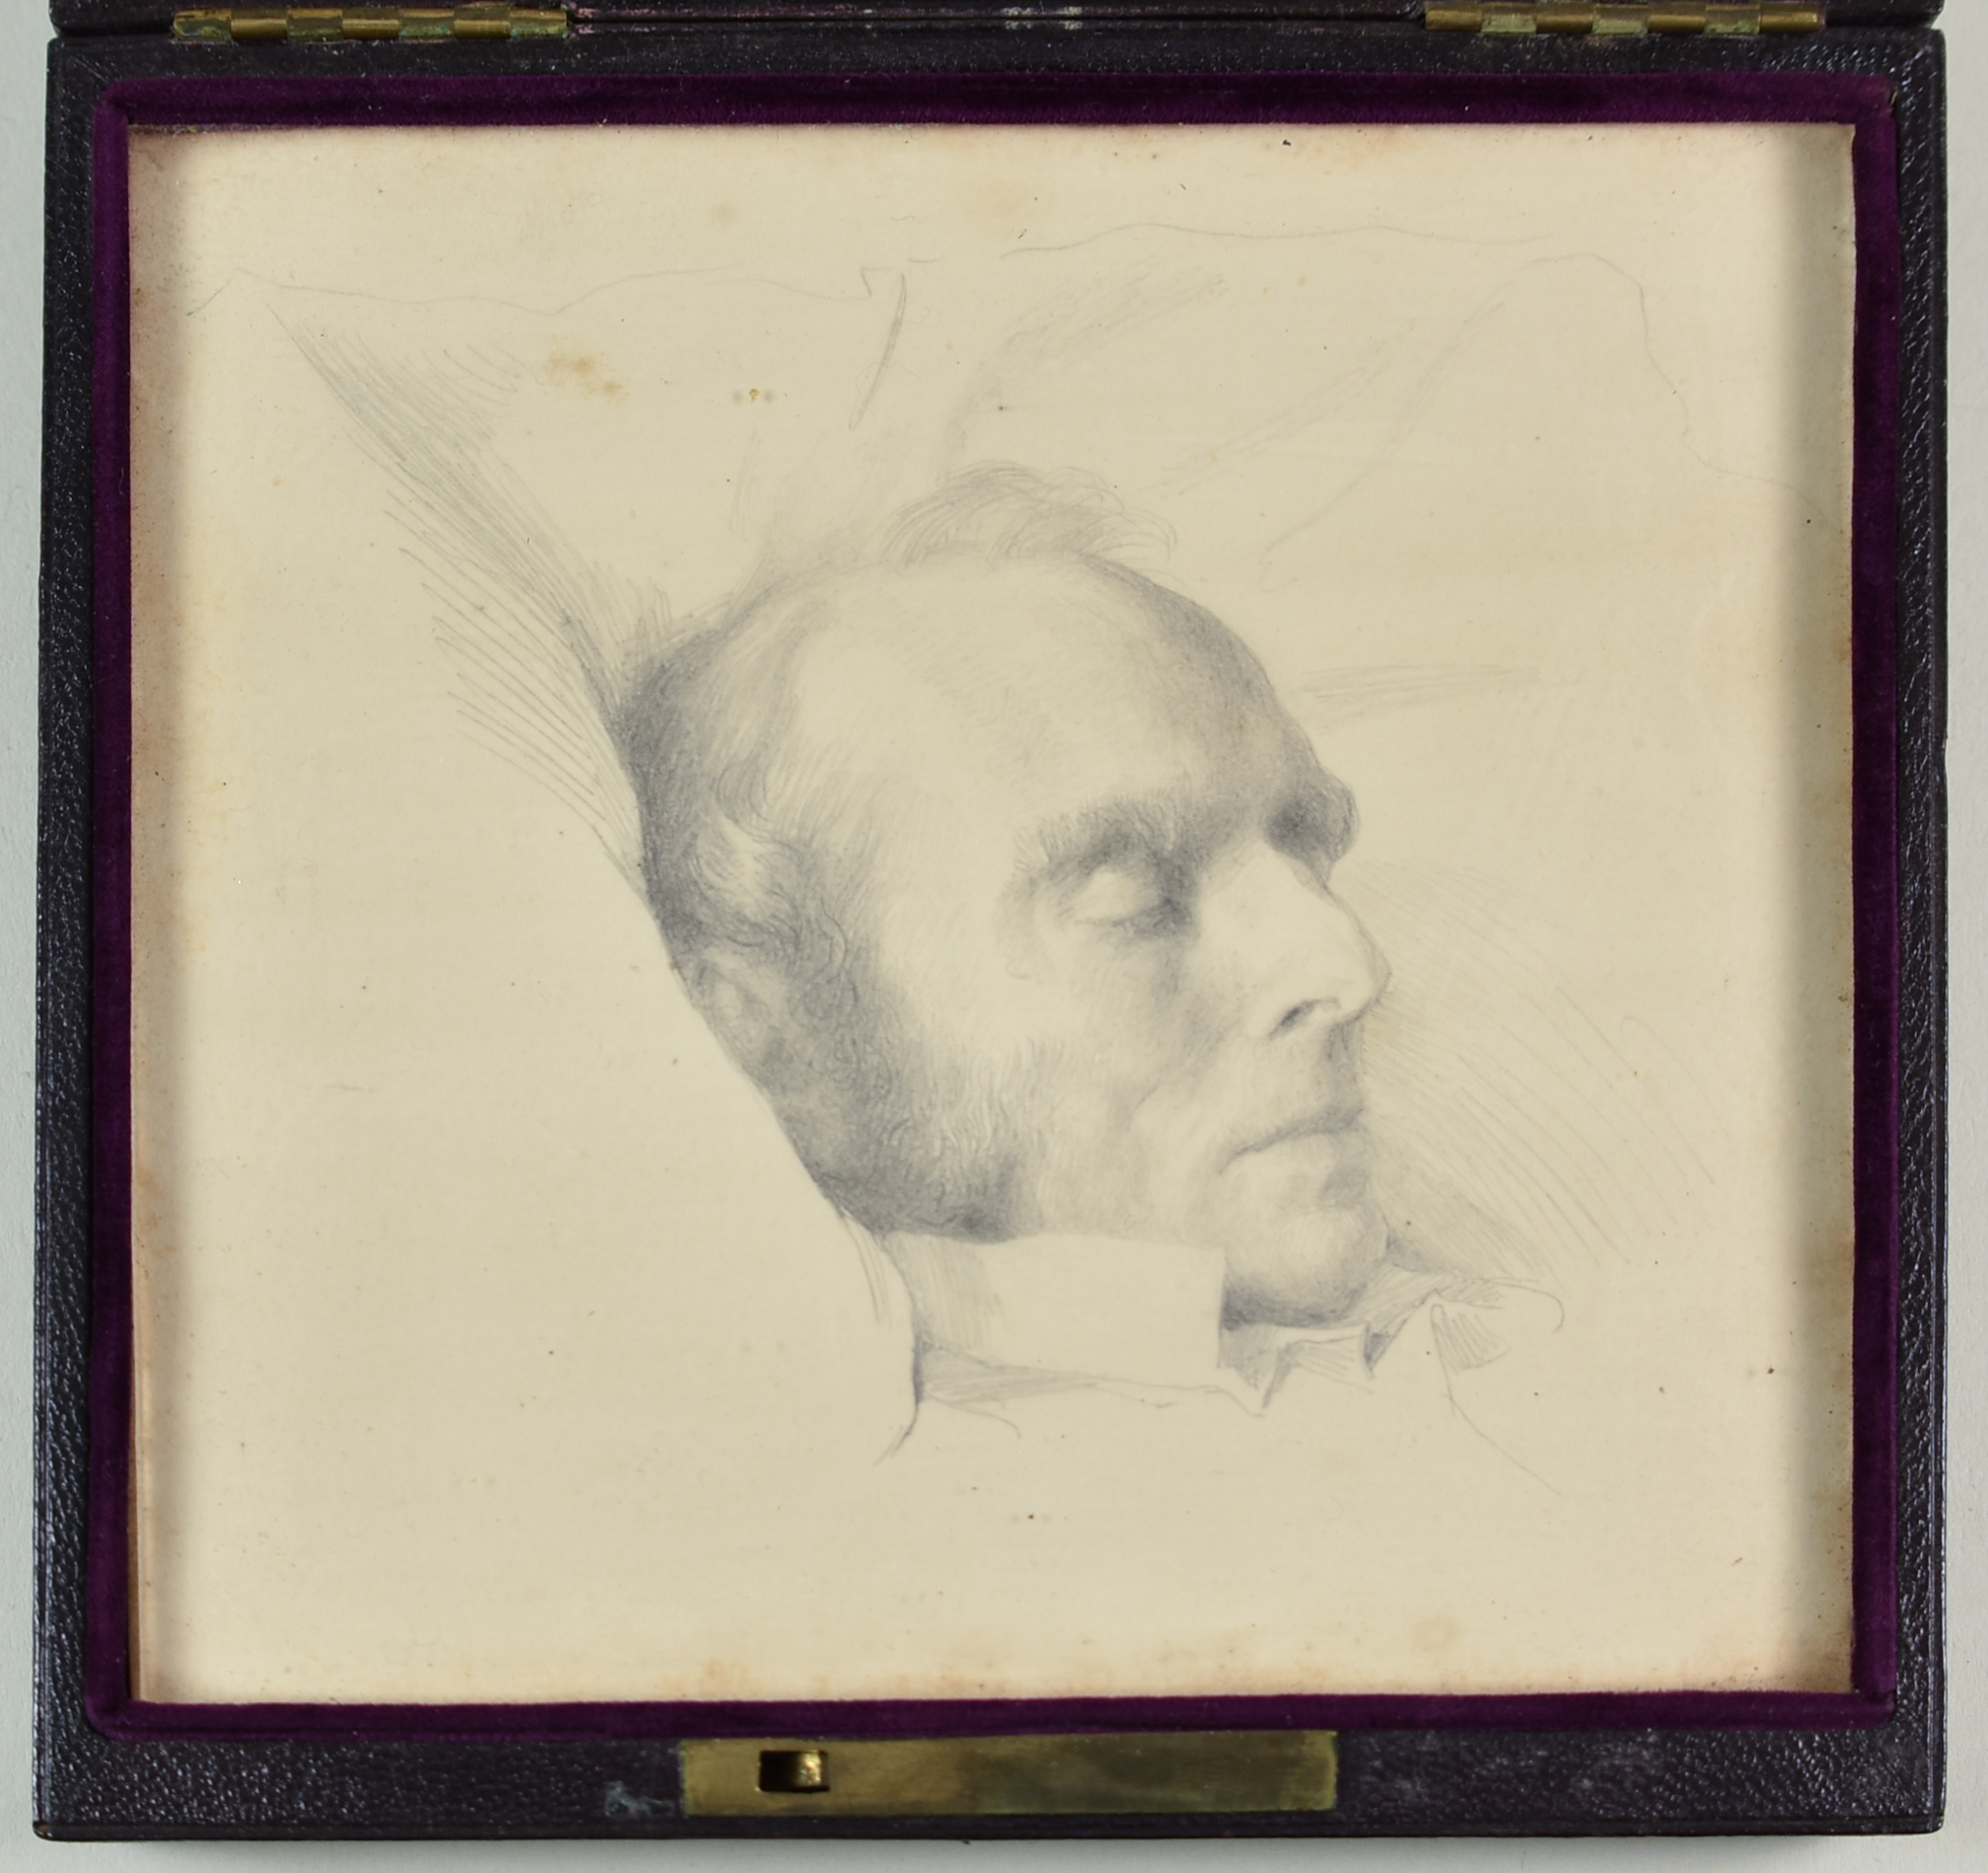 George Frederick Watts (1817-1904) - Pencil drawing - Portrait study of Thomas Hughes (1822-96) in